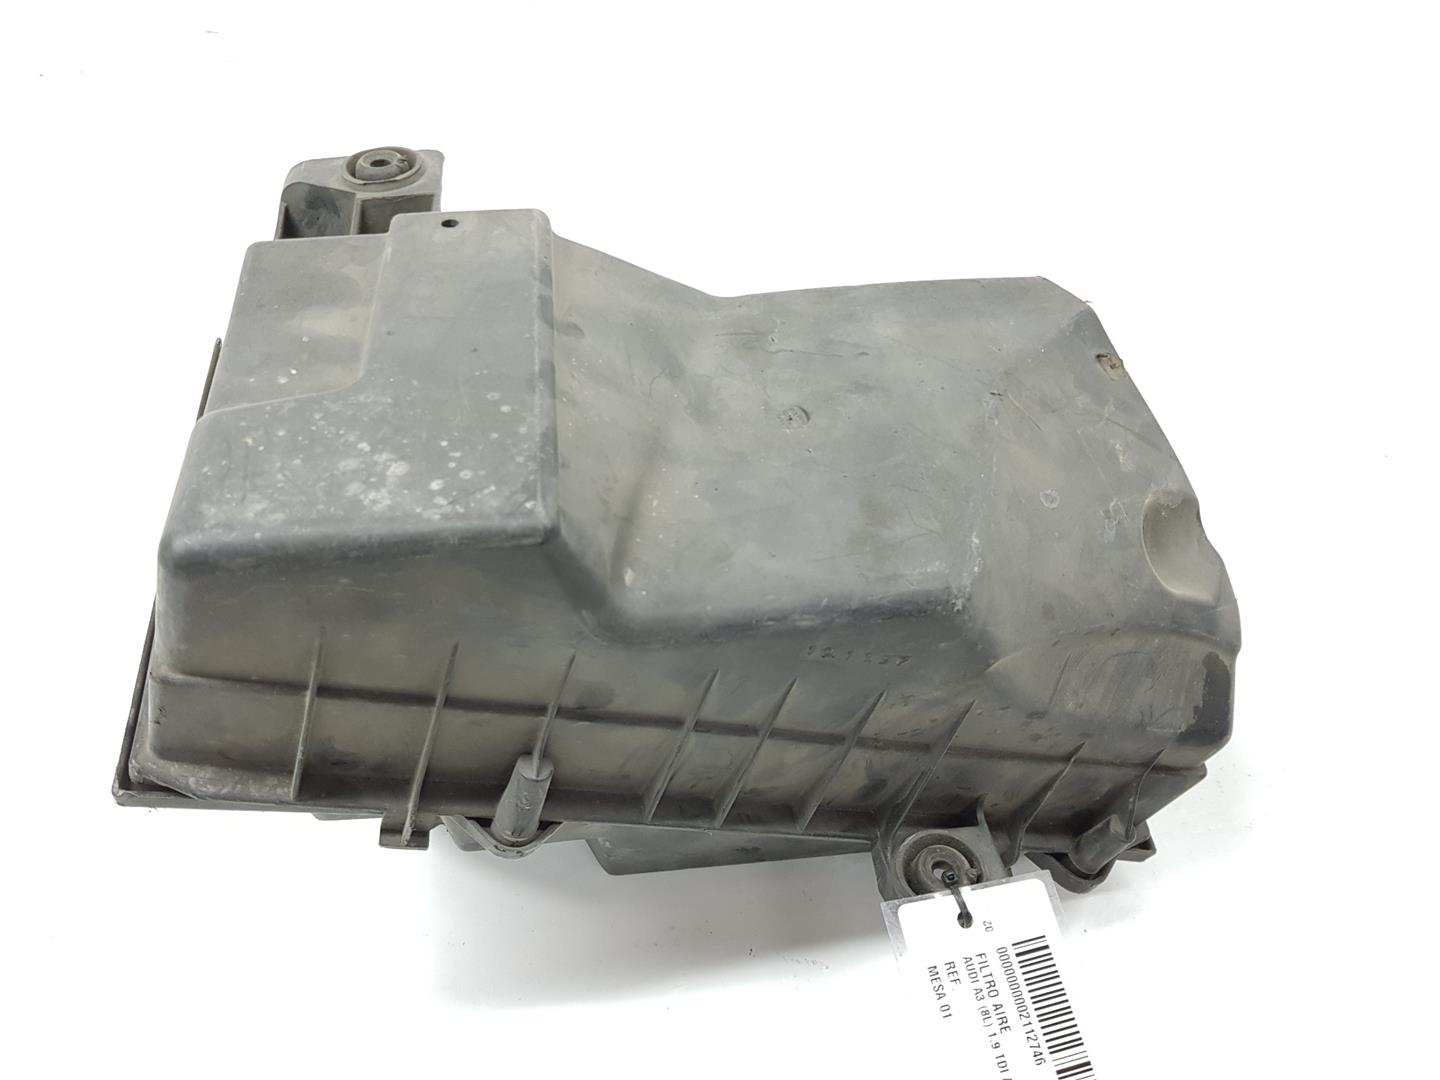 ALFA ROMEO Spider 916 (1995-2006) Other Engine Compartment Parts 1J0129607G, 1J0129607G 24248181